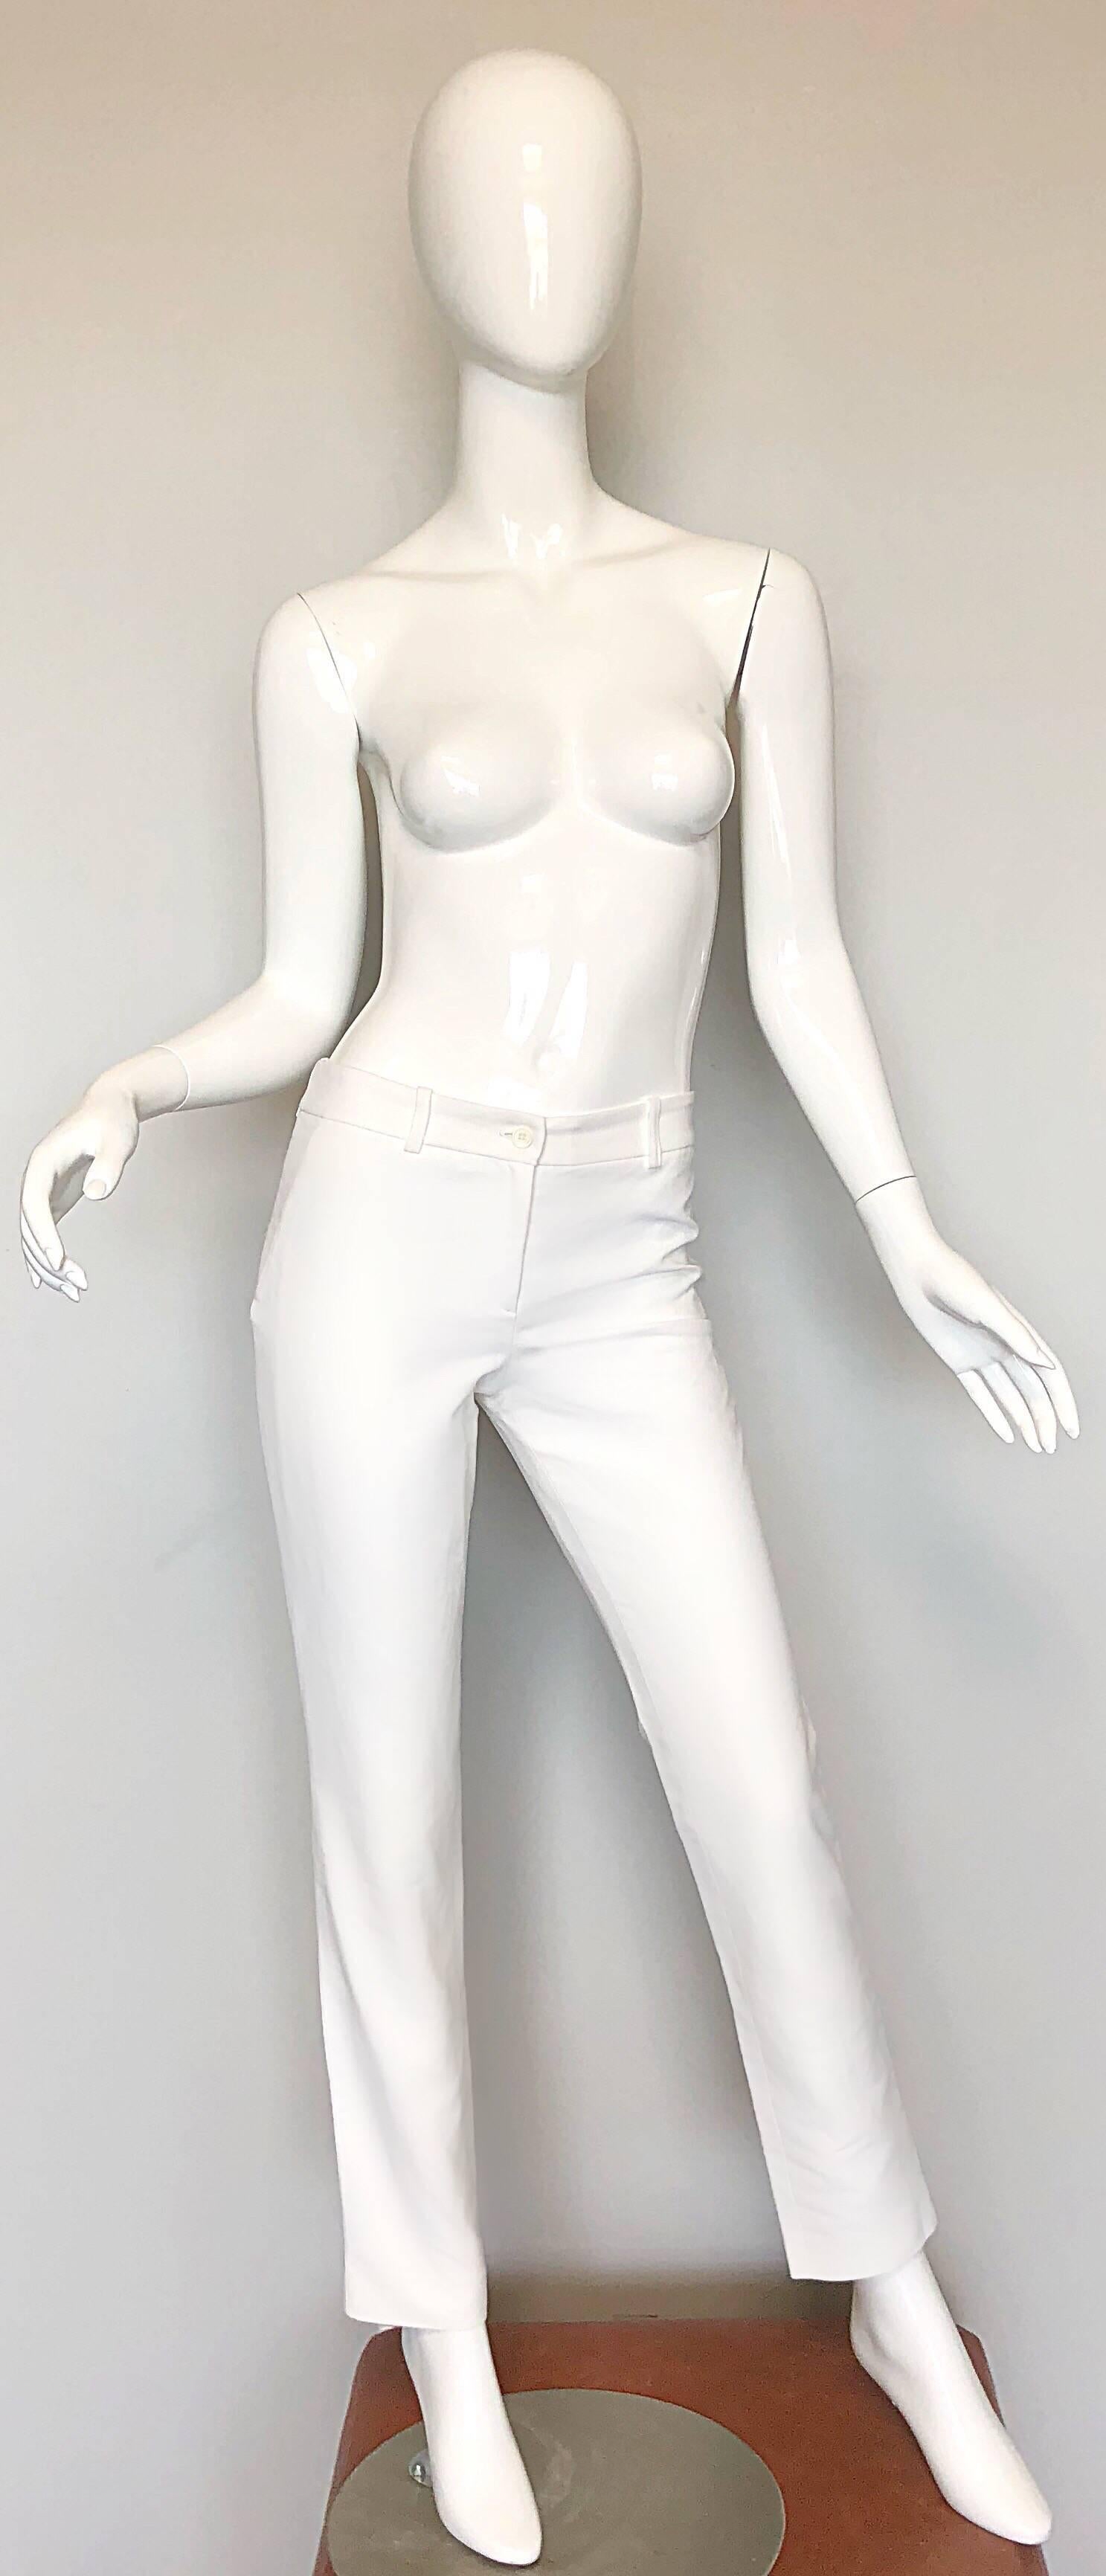 MICHAEL KORS COLLECTION early 2000s high waisted white cotton tailored slim cigarette trousers! Features a flattering high waist fit with tailored slim slightly cropped legs. Pockets at each side of the waist and on the rear. Button closure at